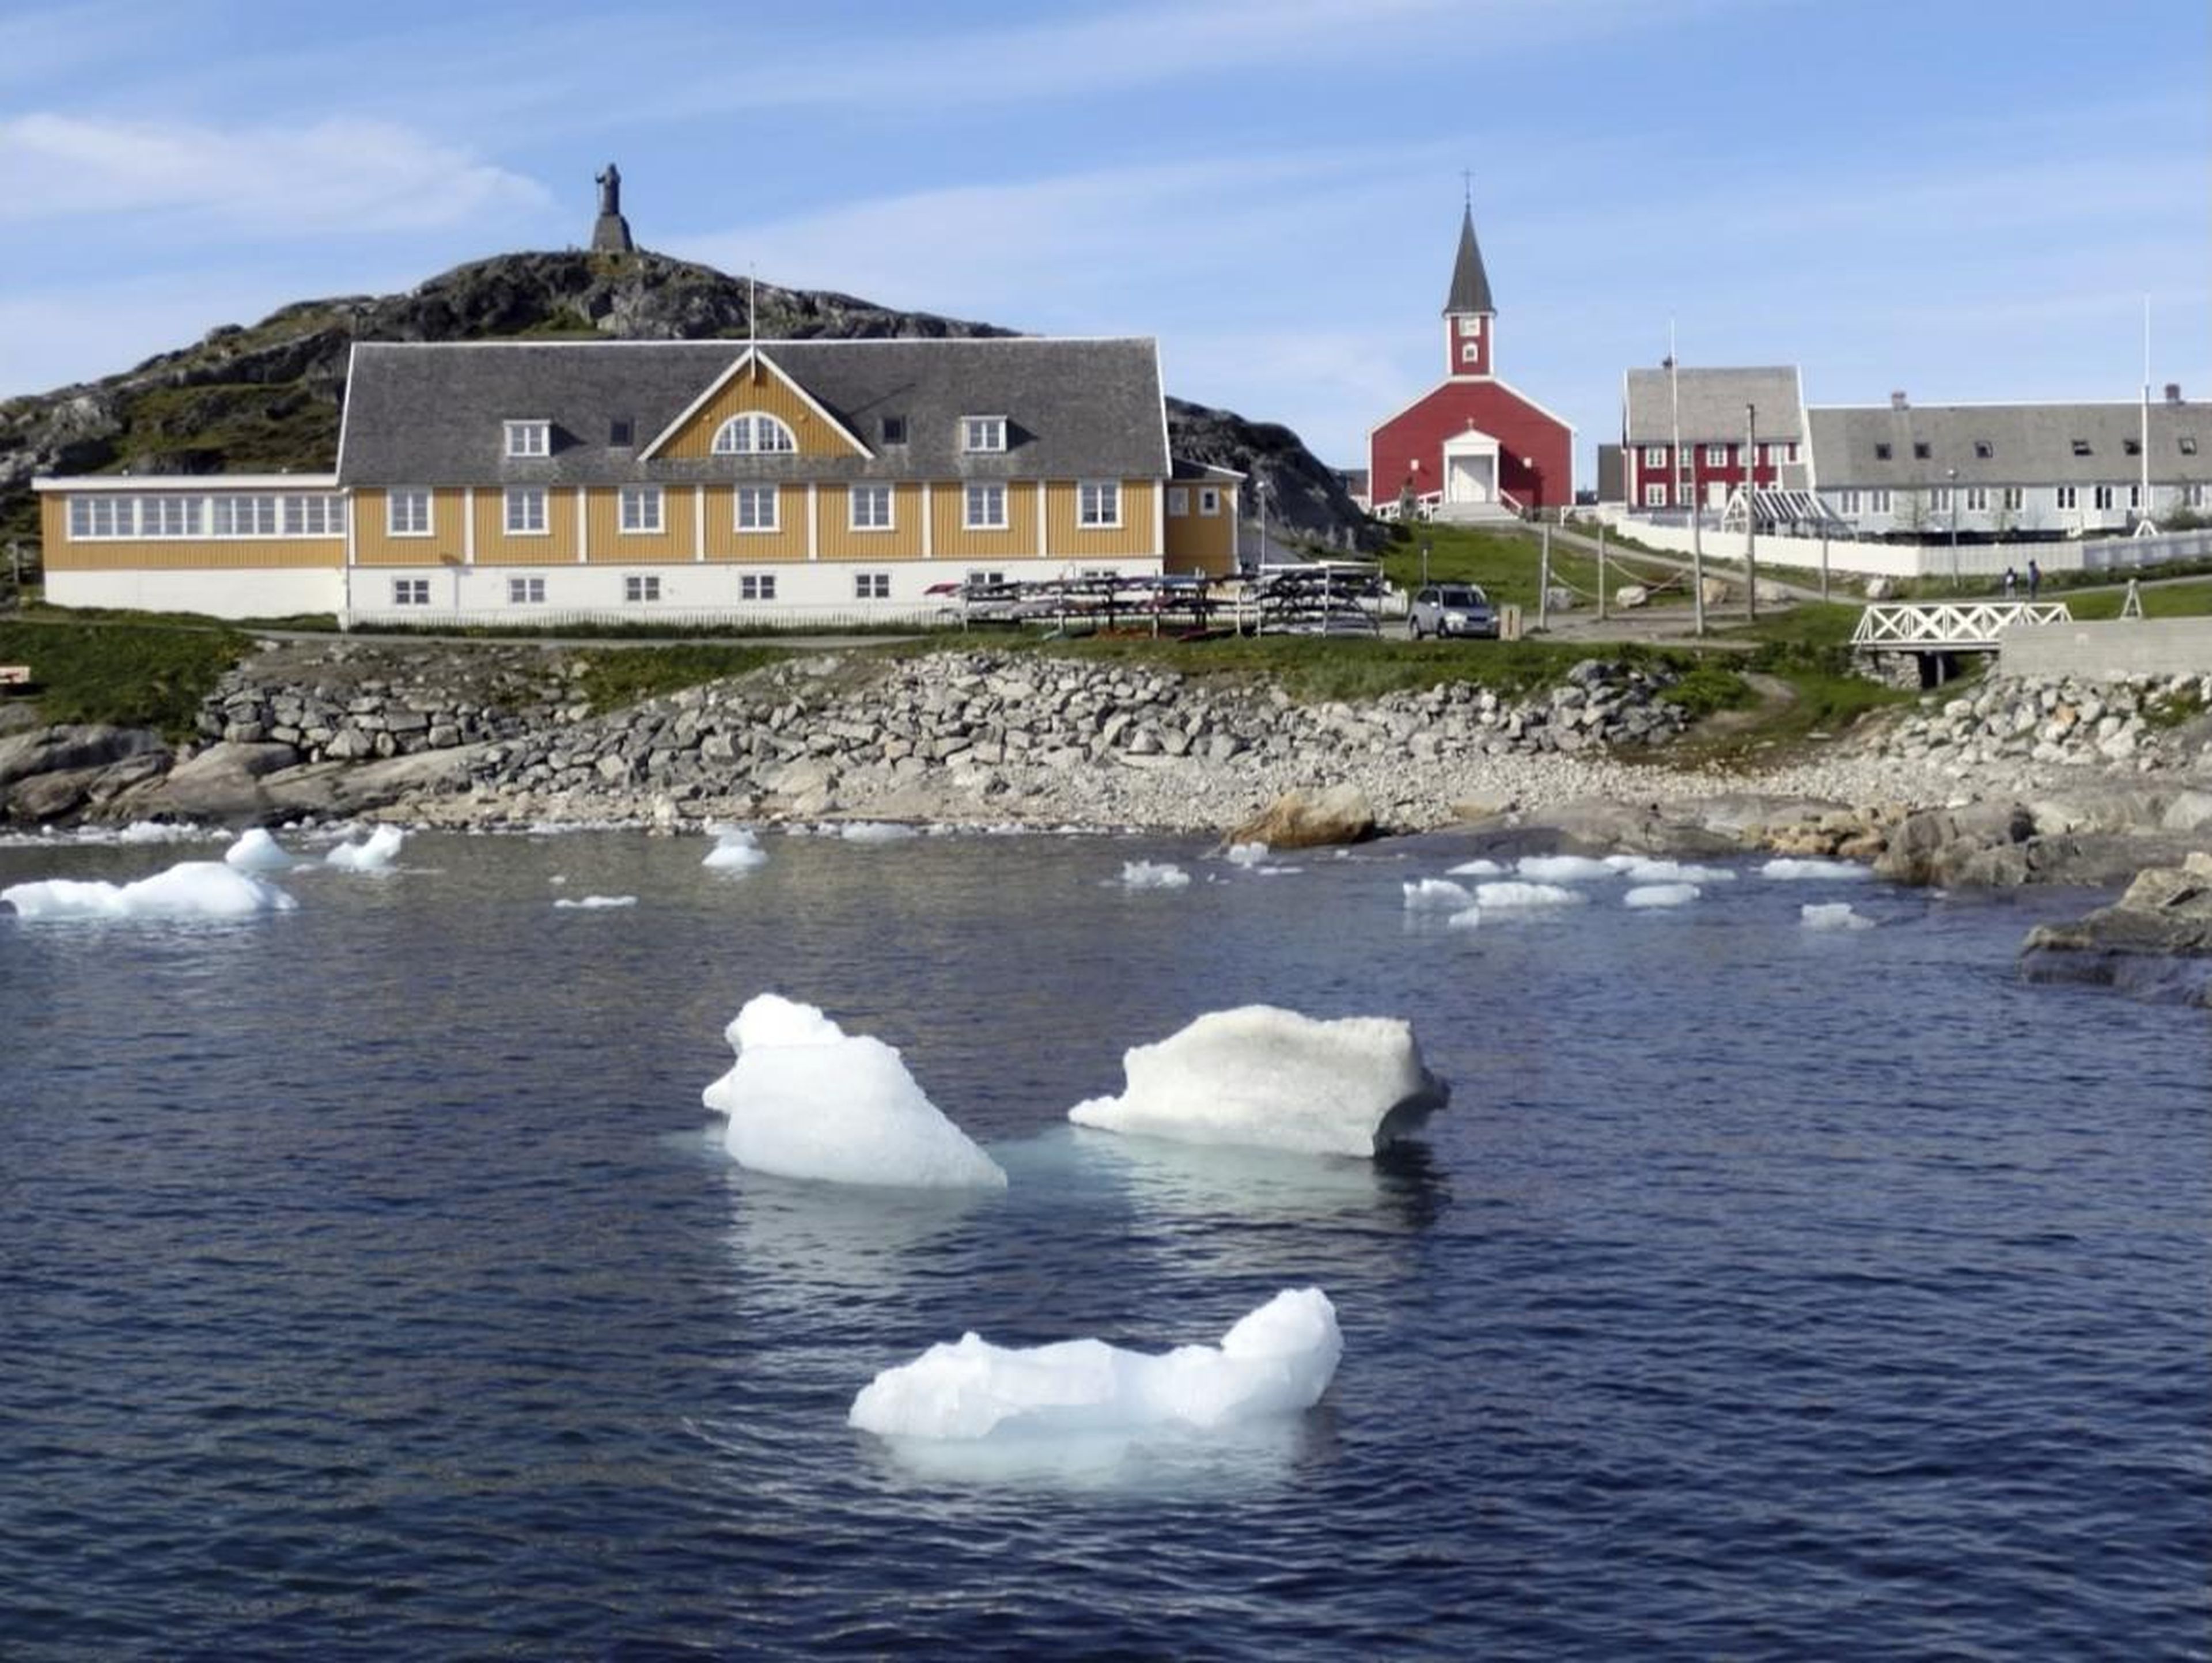 Small pieces of ice float in the water off the shore in Nuuk, Greenland on June 13, 2019.